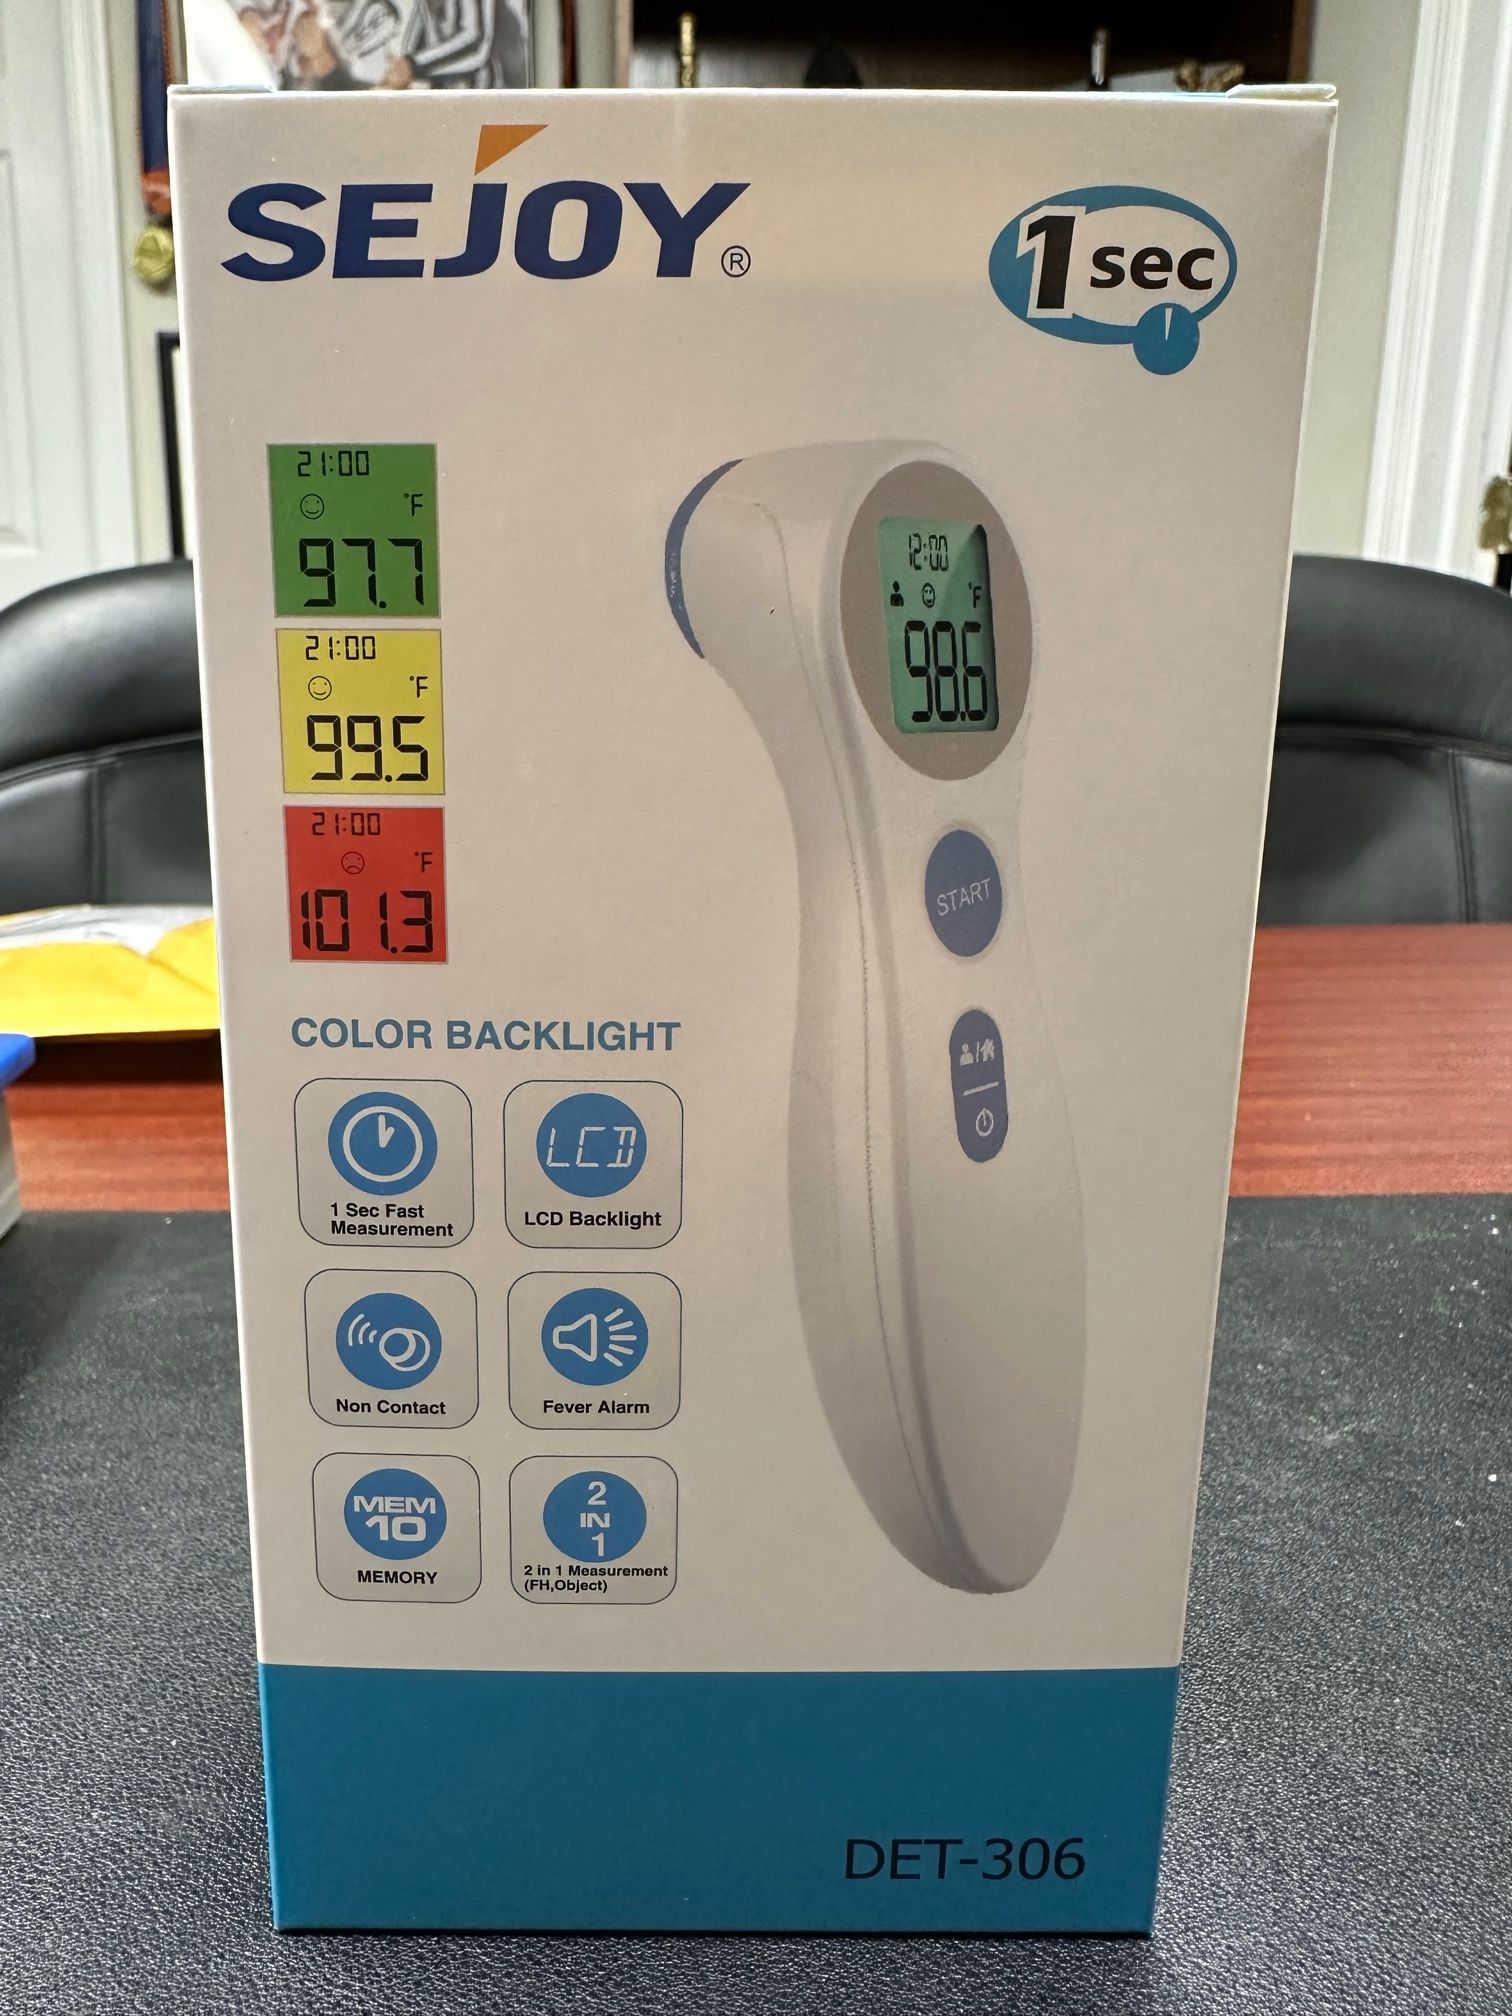 Infrared Forehead Thermometer, Non-Contact Household Body Thermometer  Temperature Meter Home Fast Measuring, Infrared Thermometer